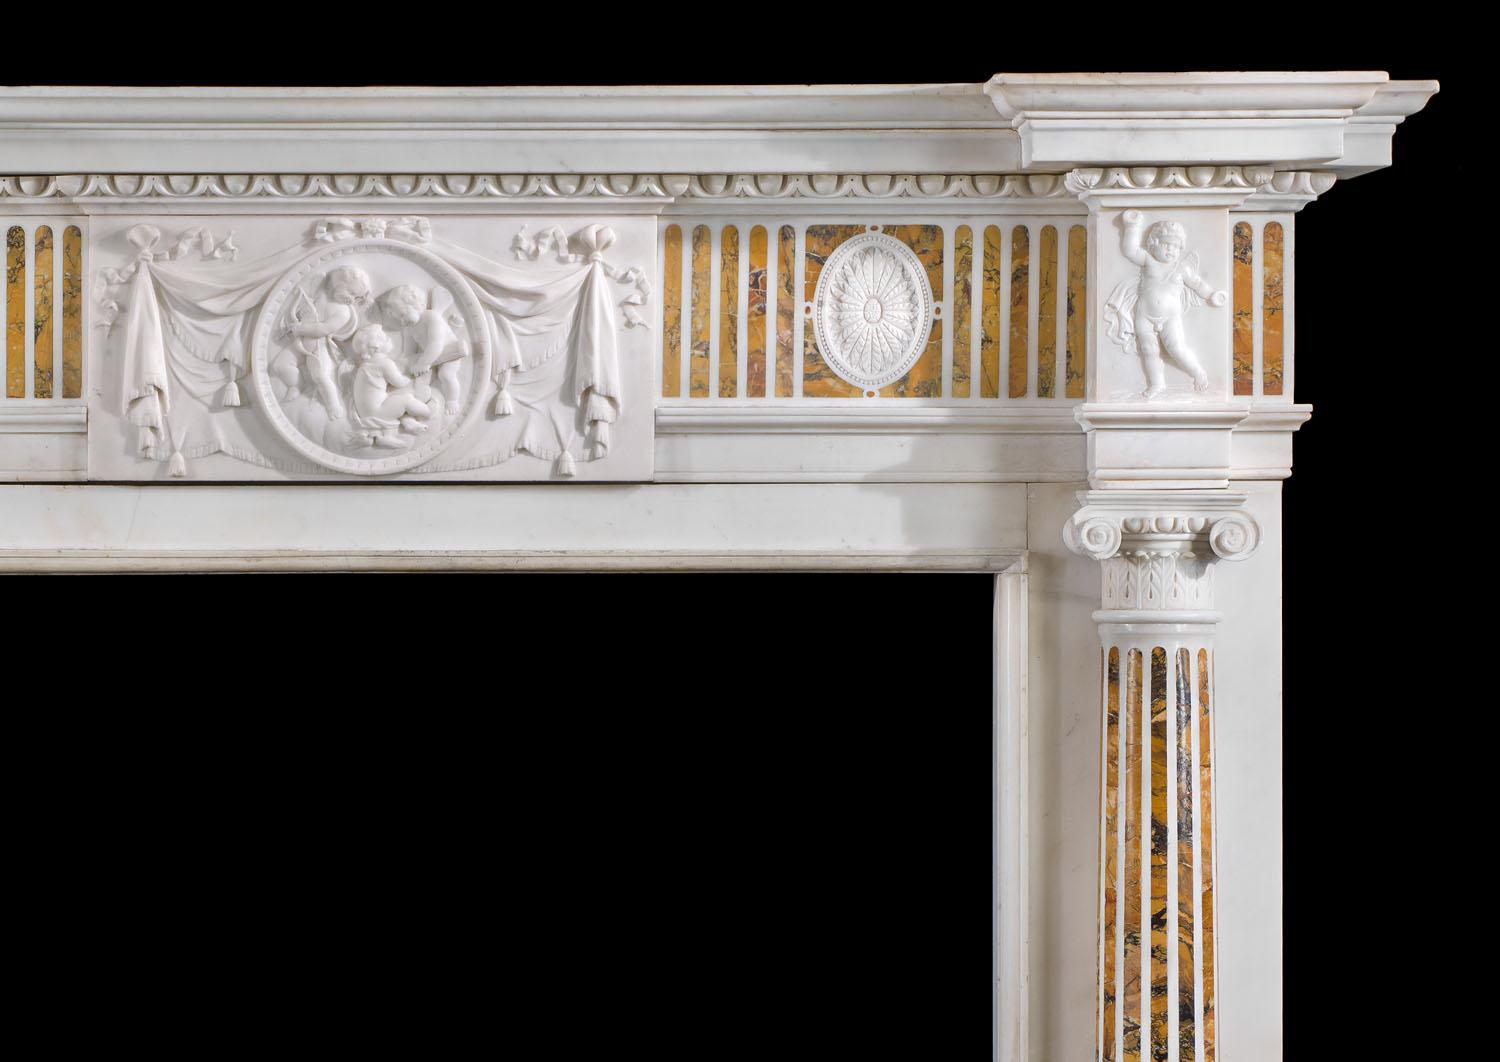 A fine George III chimneypiece in Statuary and Siena marble. The inverted breakfront shelf sits above a boldly carved egg and dart undershelf, resting over the faux fluted frieze inlaid with fine Siena Marble and studded with two oval paterae.
The